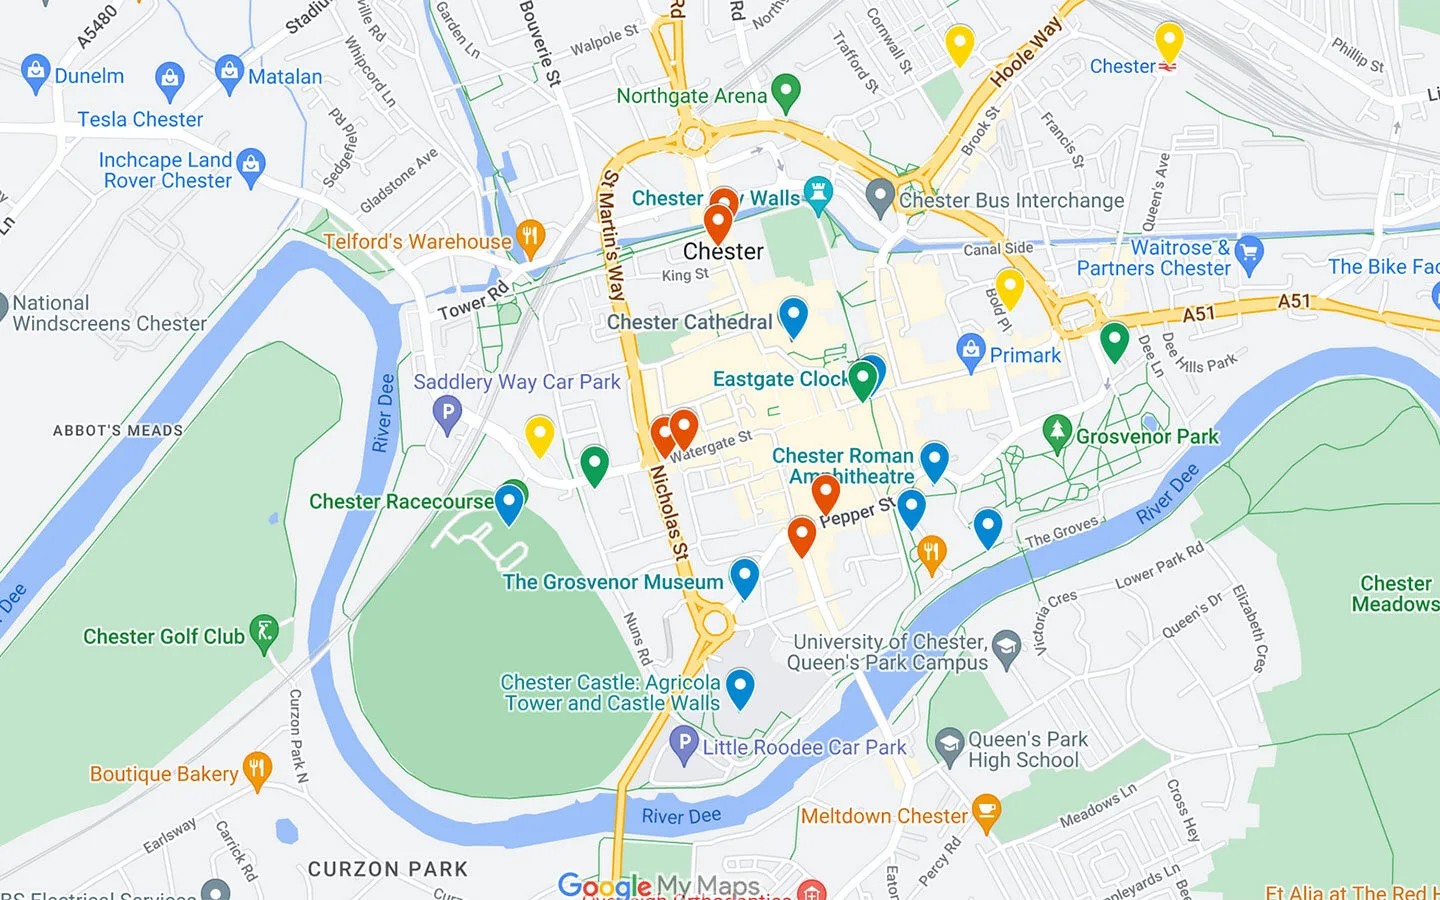 Map of things to do on a weekend in Chester